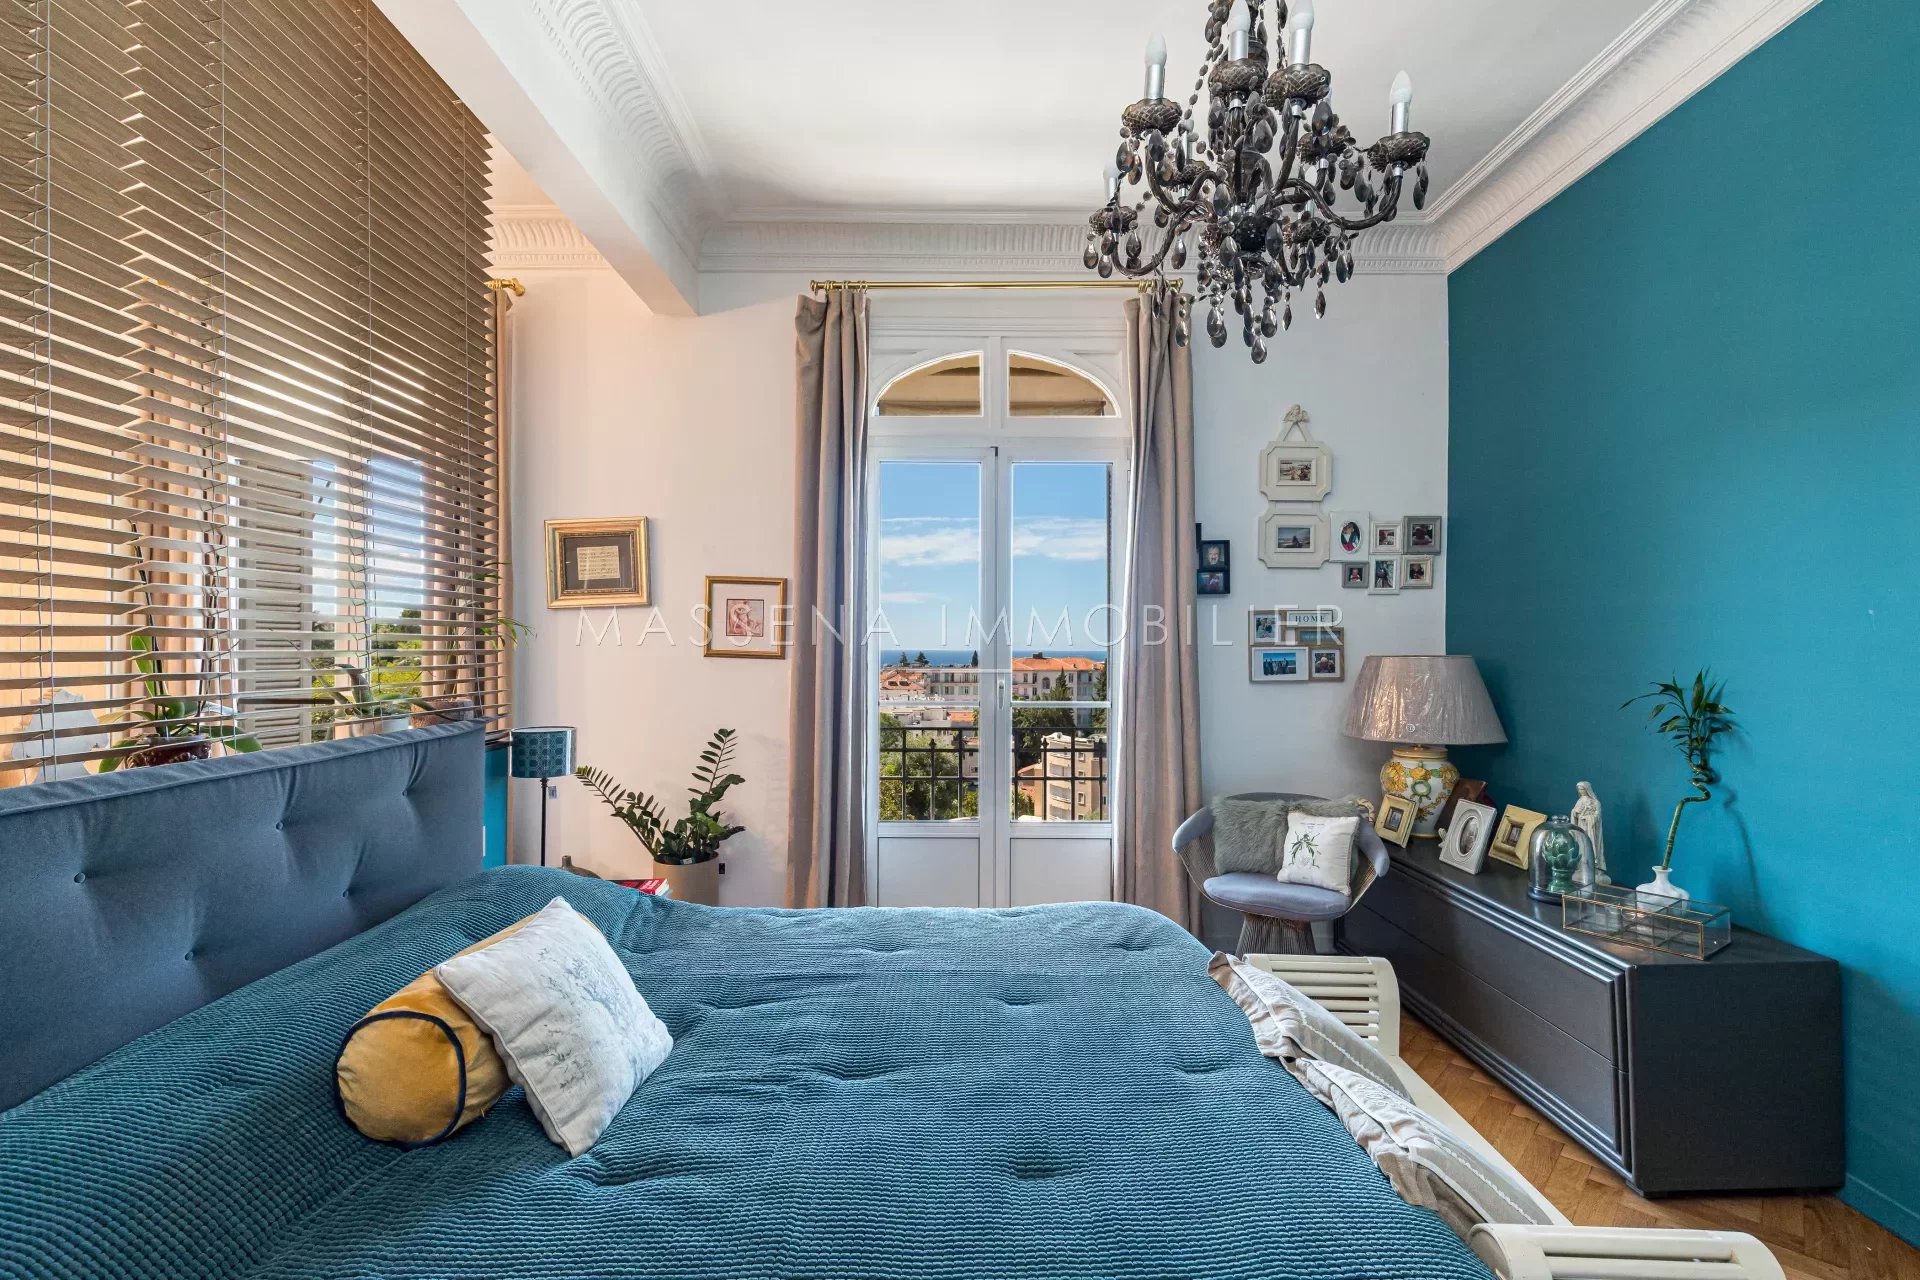 Nice Cimiez - Wonderfull 3bedrooms apartment with sea view in palace Belle Epoque